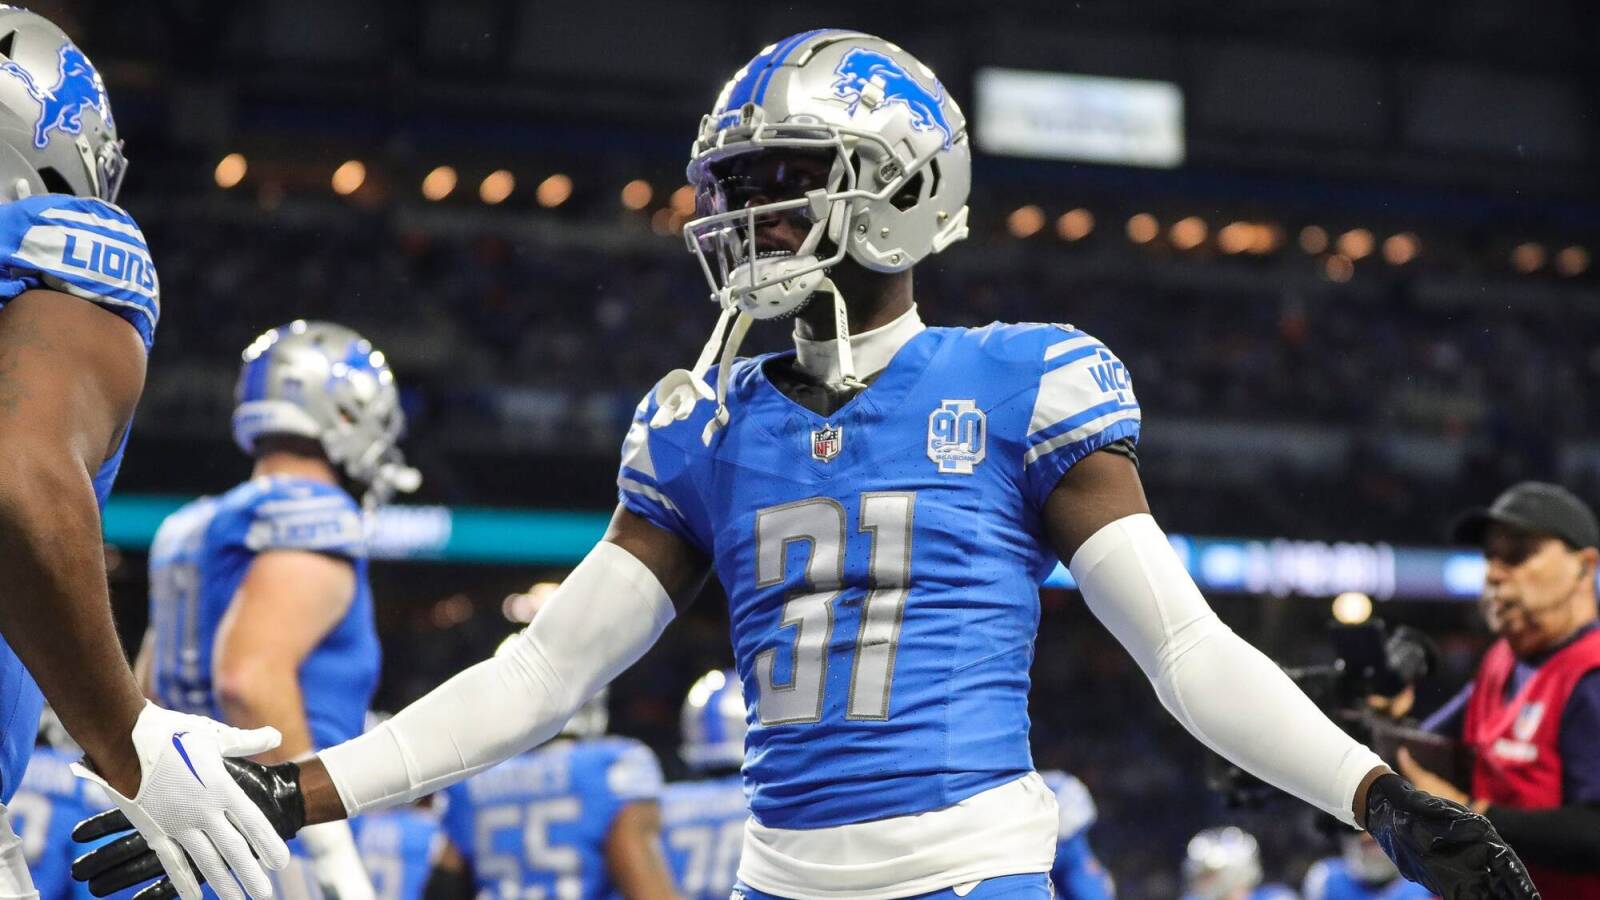 Detroit Lions safety Kerby Joseph recovering from hip surgery after controversial hits